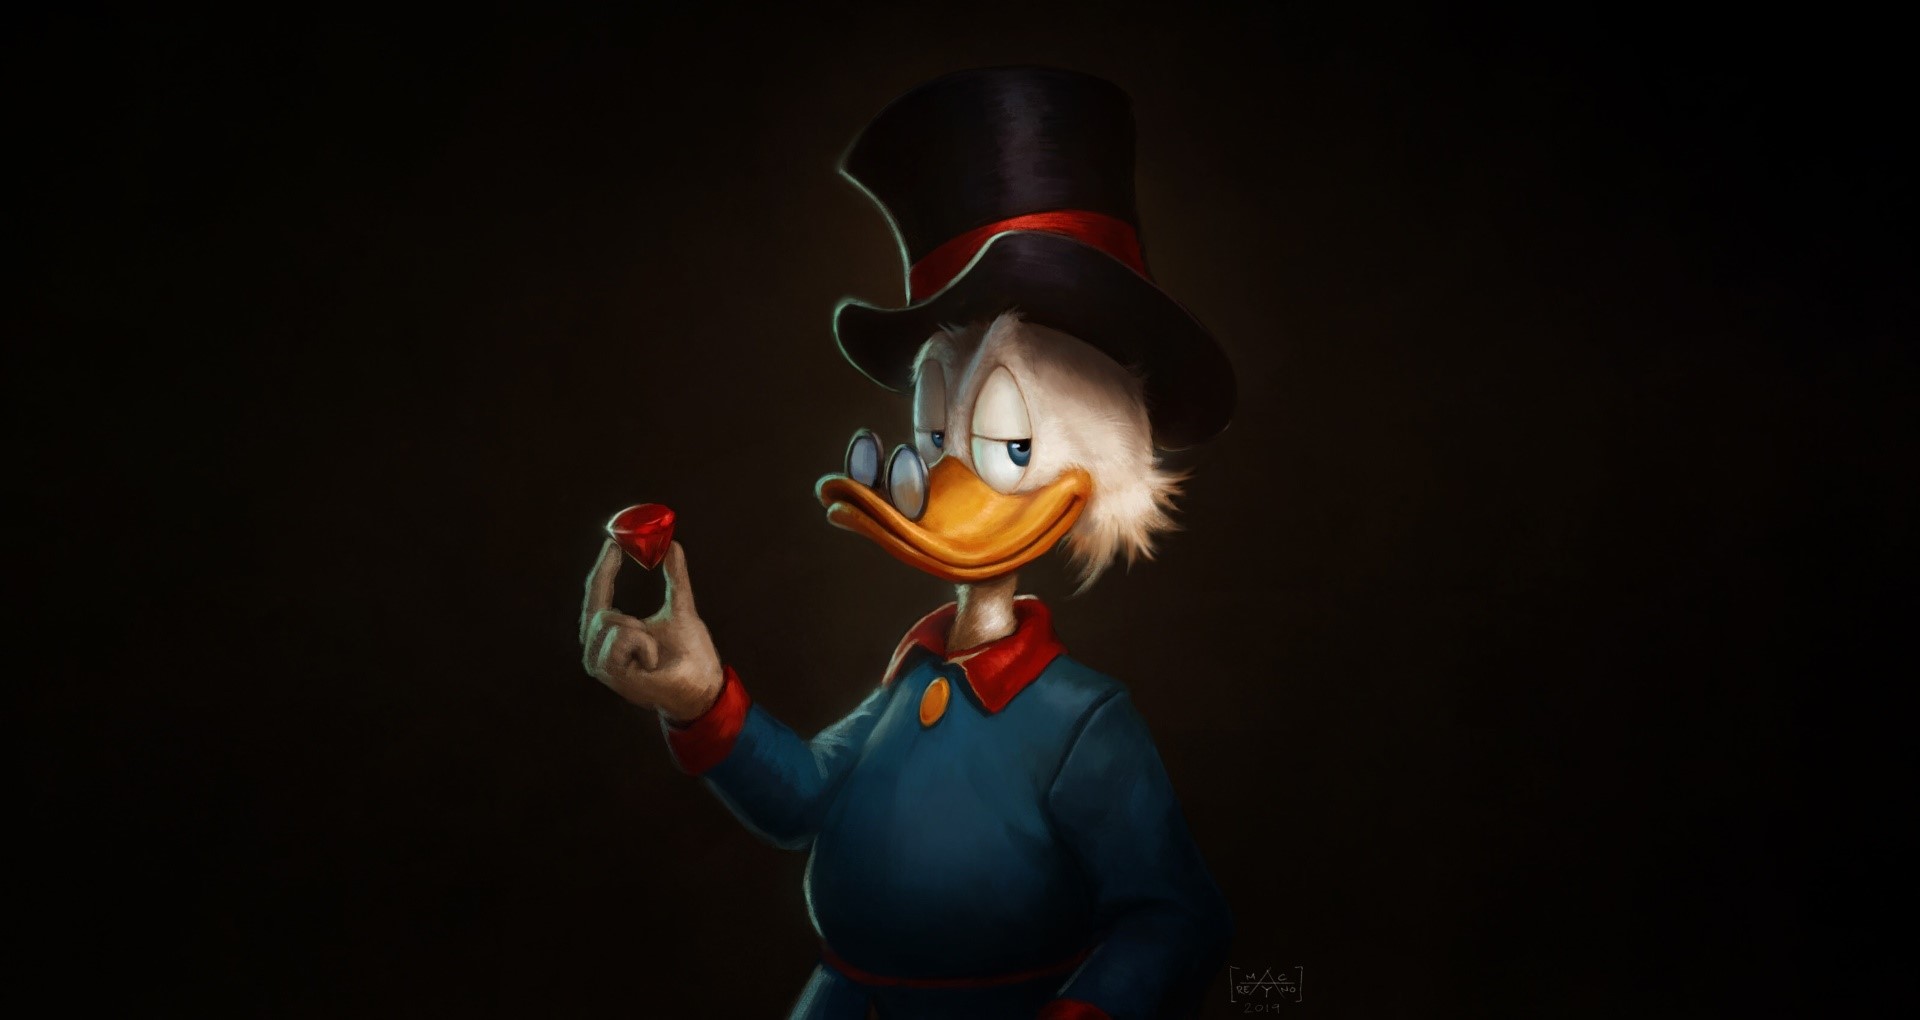 scrooge mcduck» 1080P, 2k, 4k Full HD Wallpapers, Backgrounds Free Download